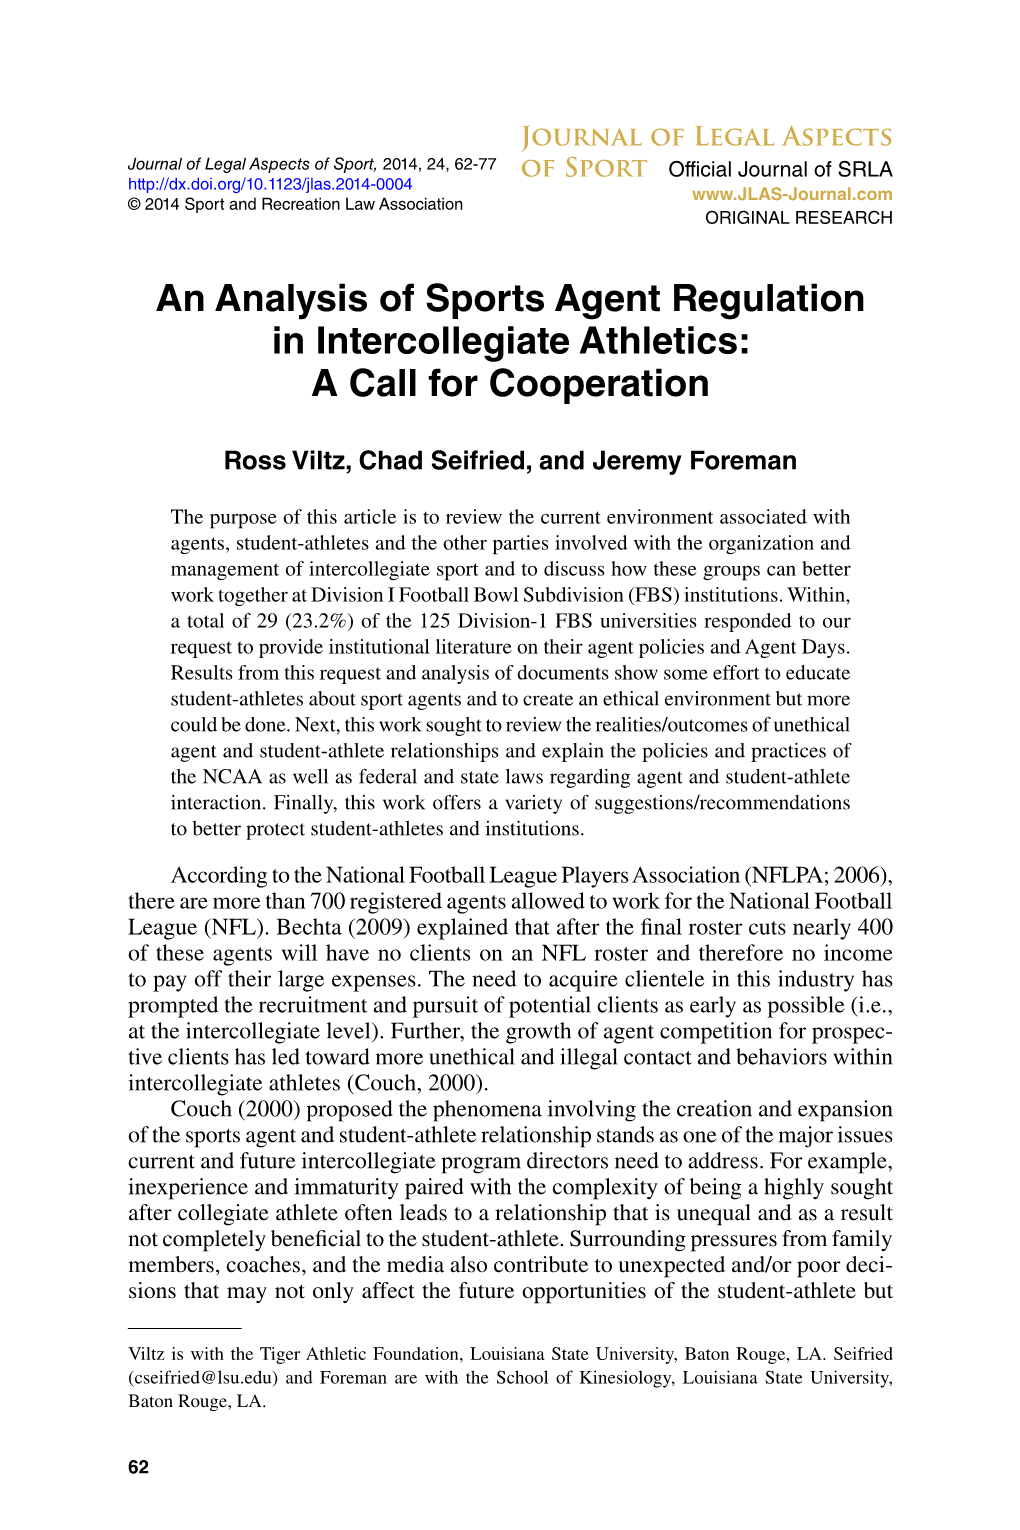 An Analysis of Sports Agent Regulation in Intercollegiate Athletics: a Call for Cooperation